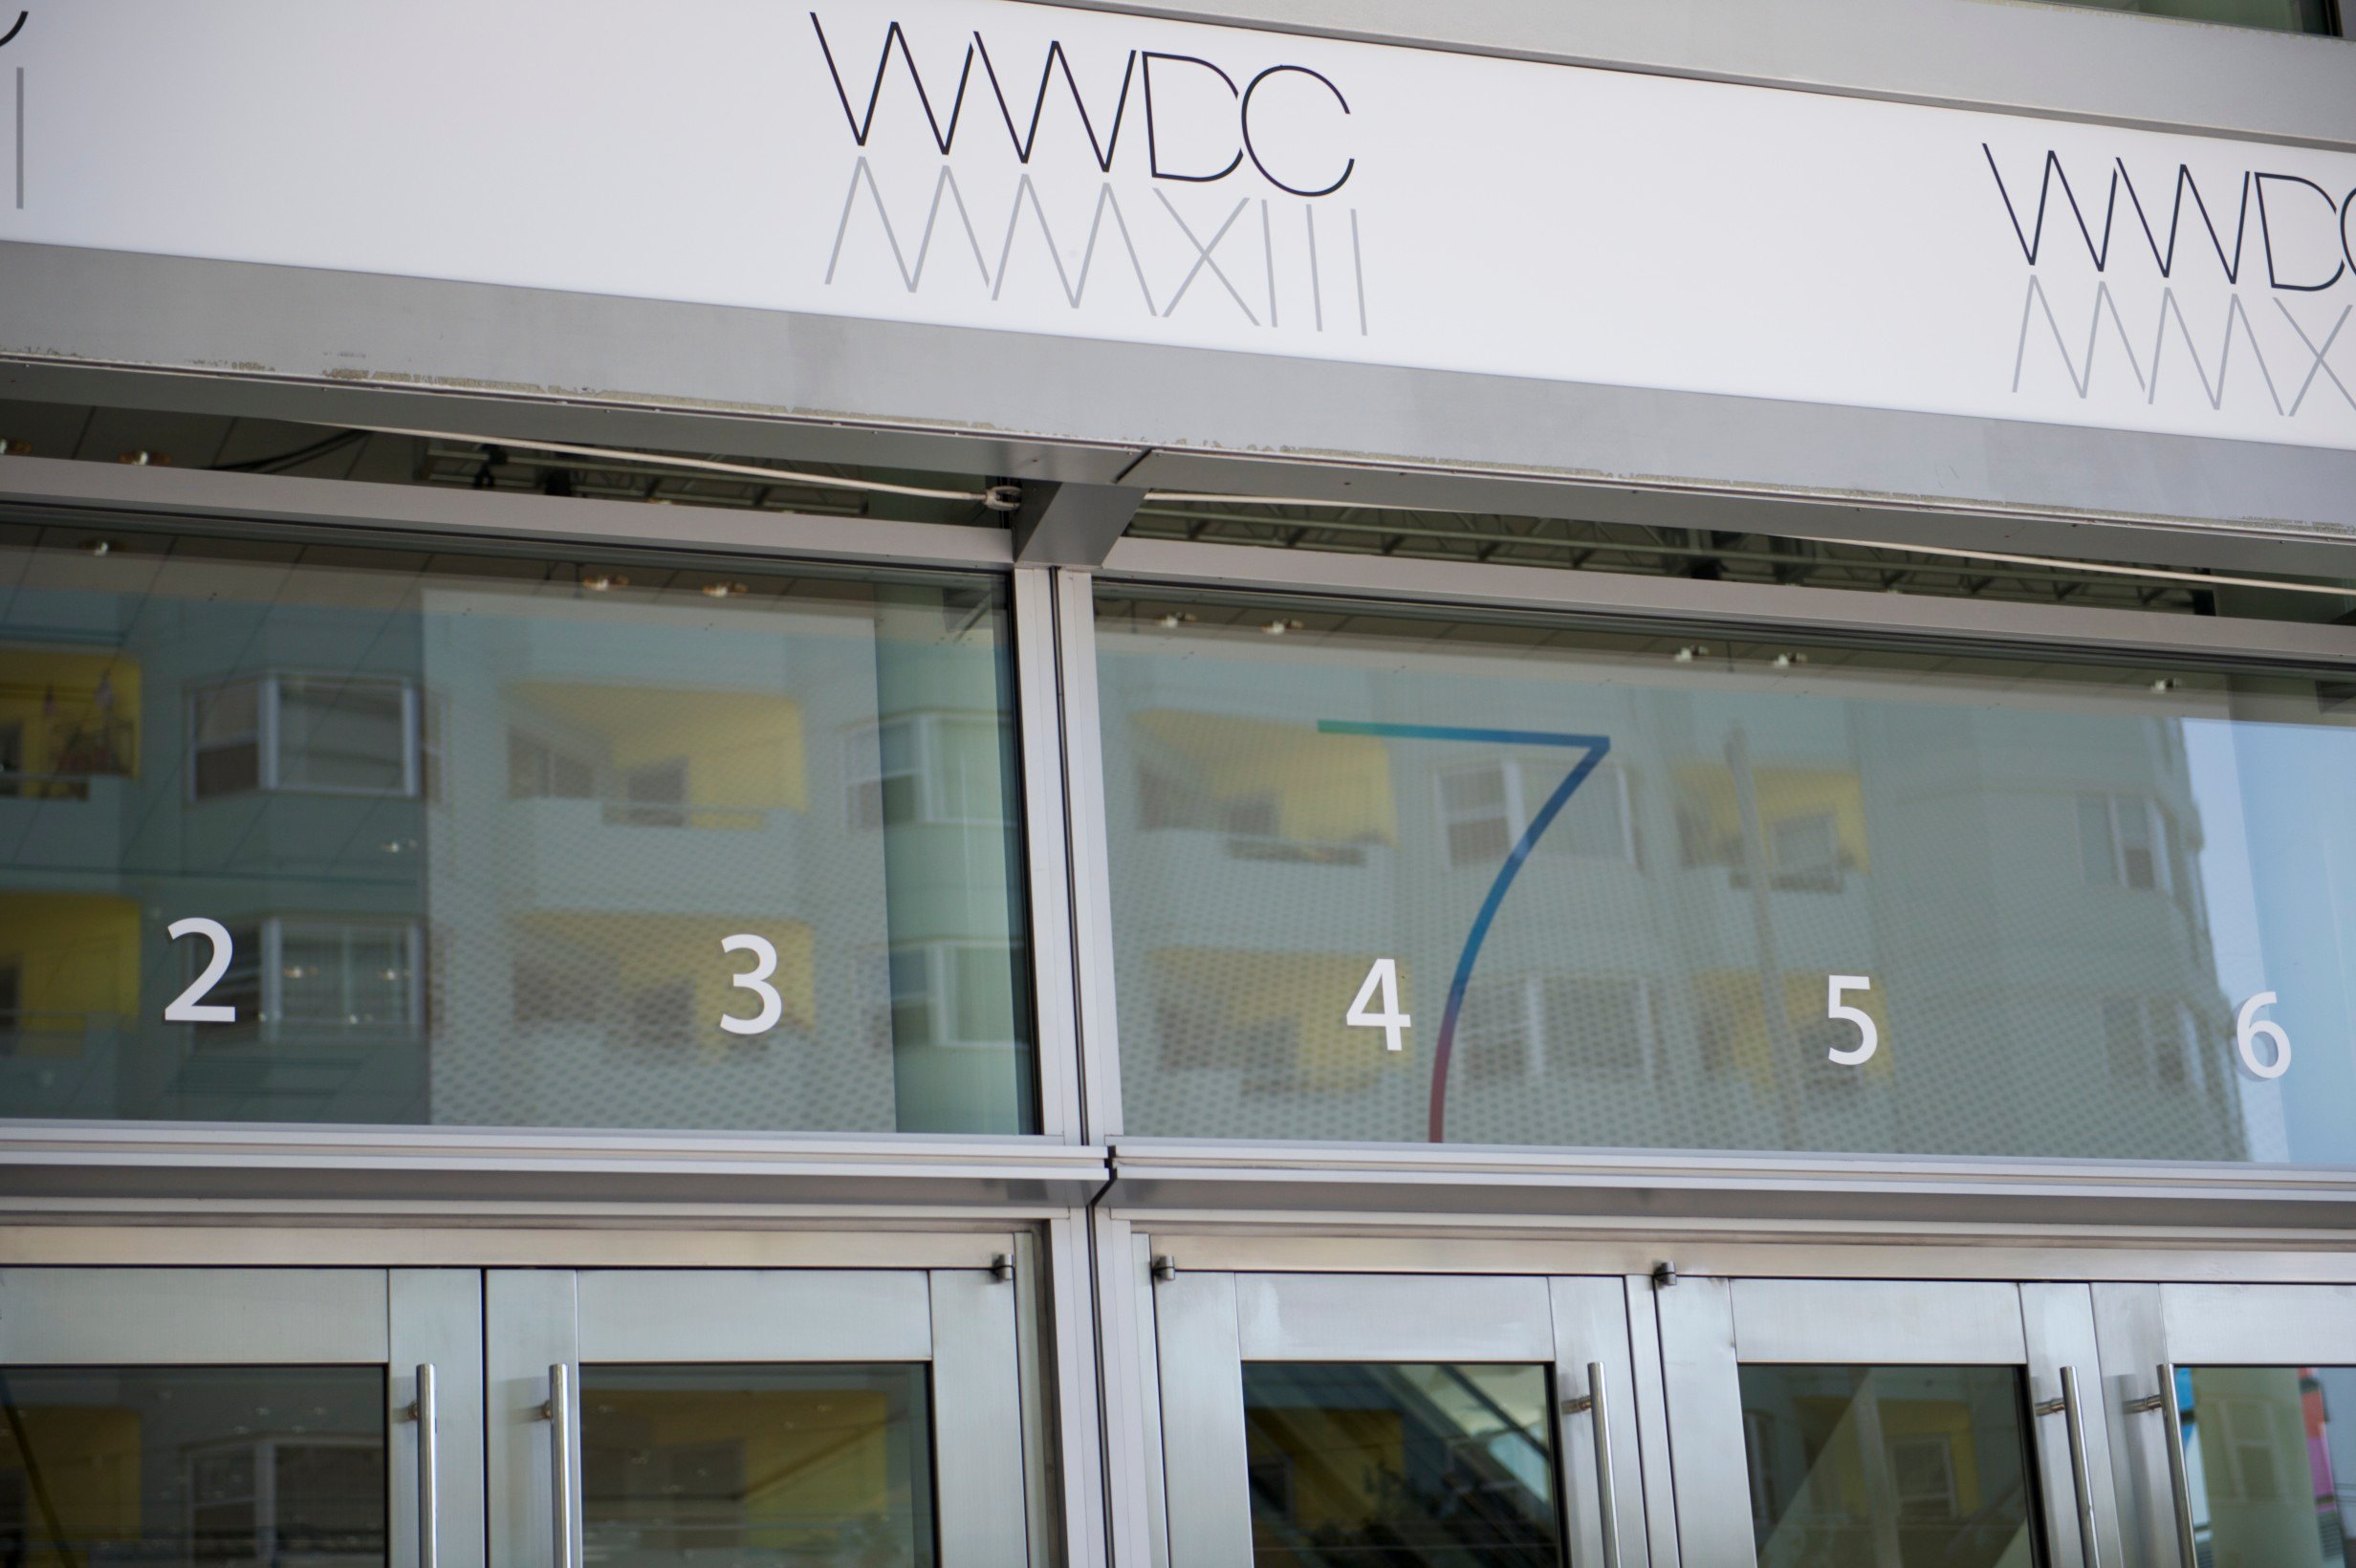 Banners at Moscone Center in San Francisco show a "7" which points to the unveiling of iOS 7.